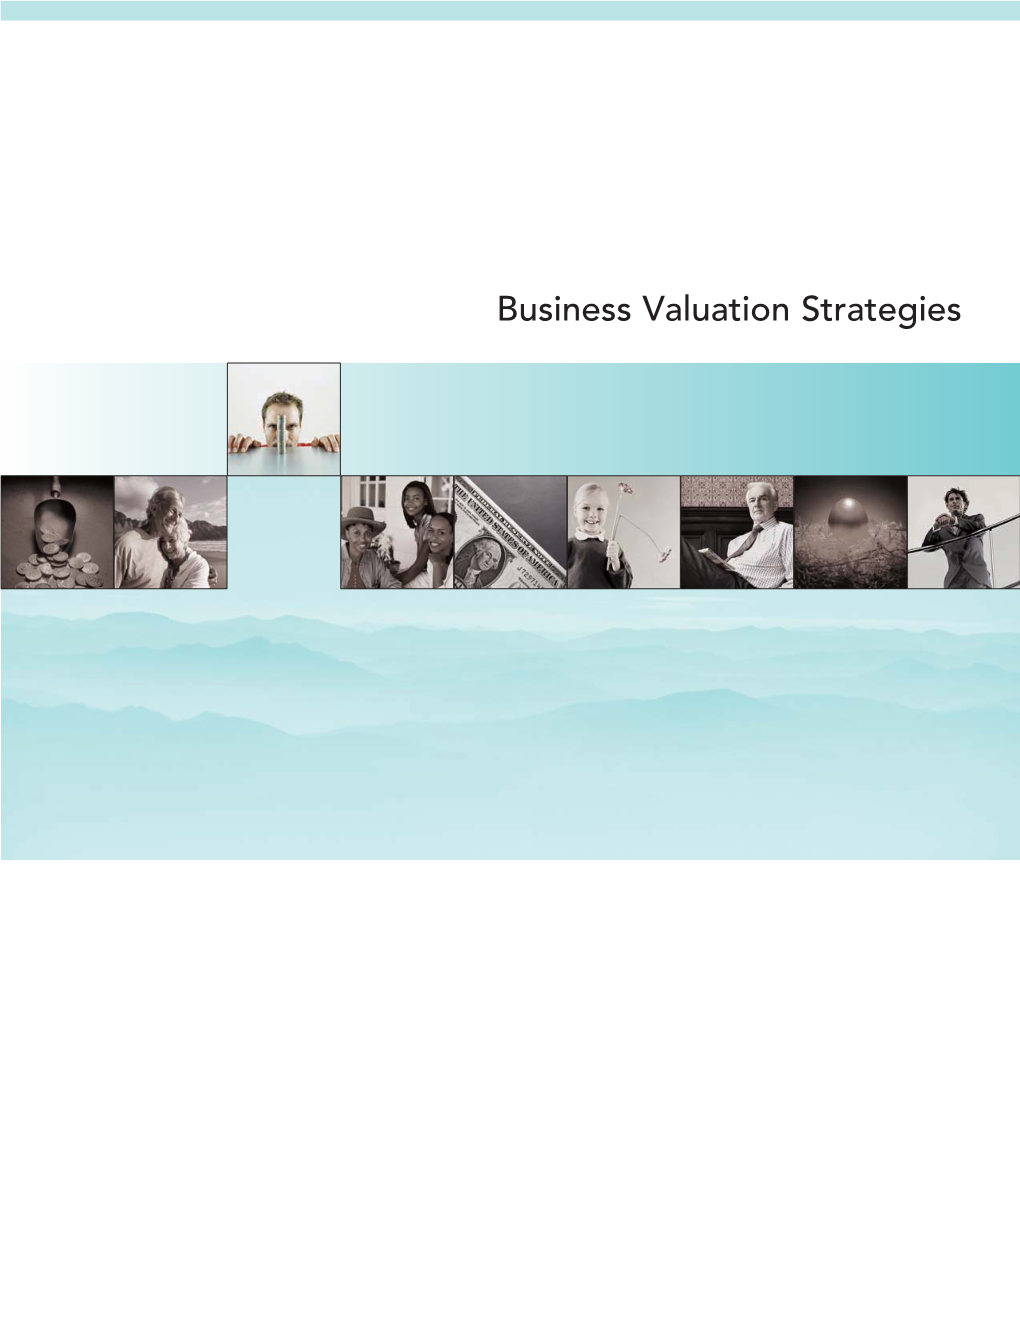 Business Valuation Strategies